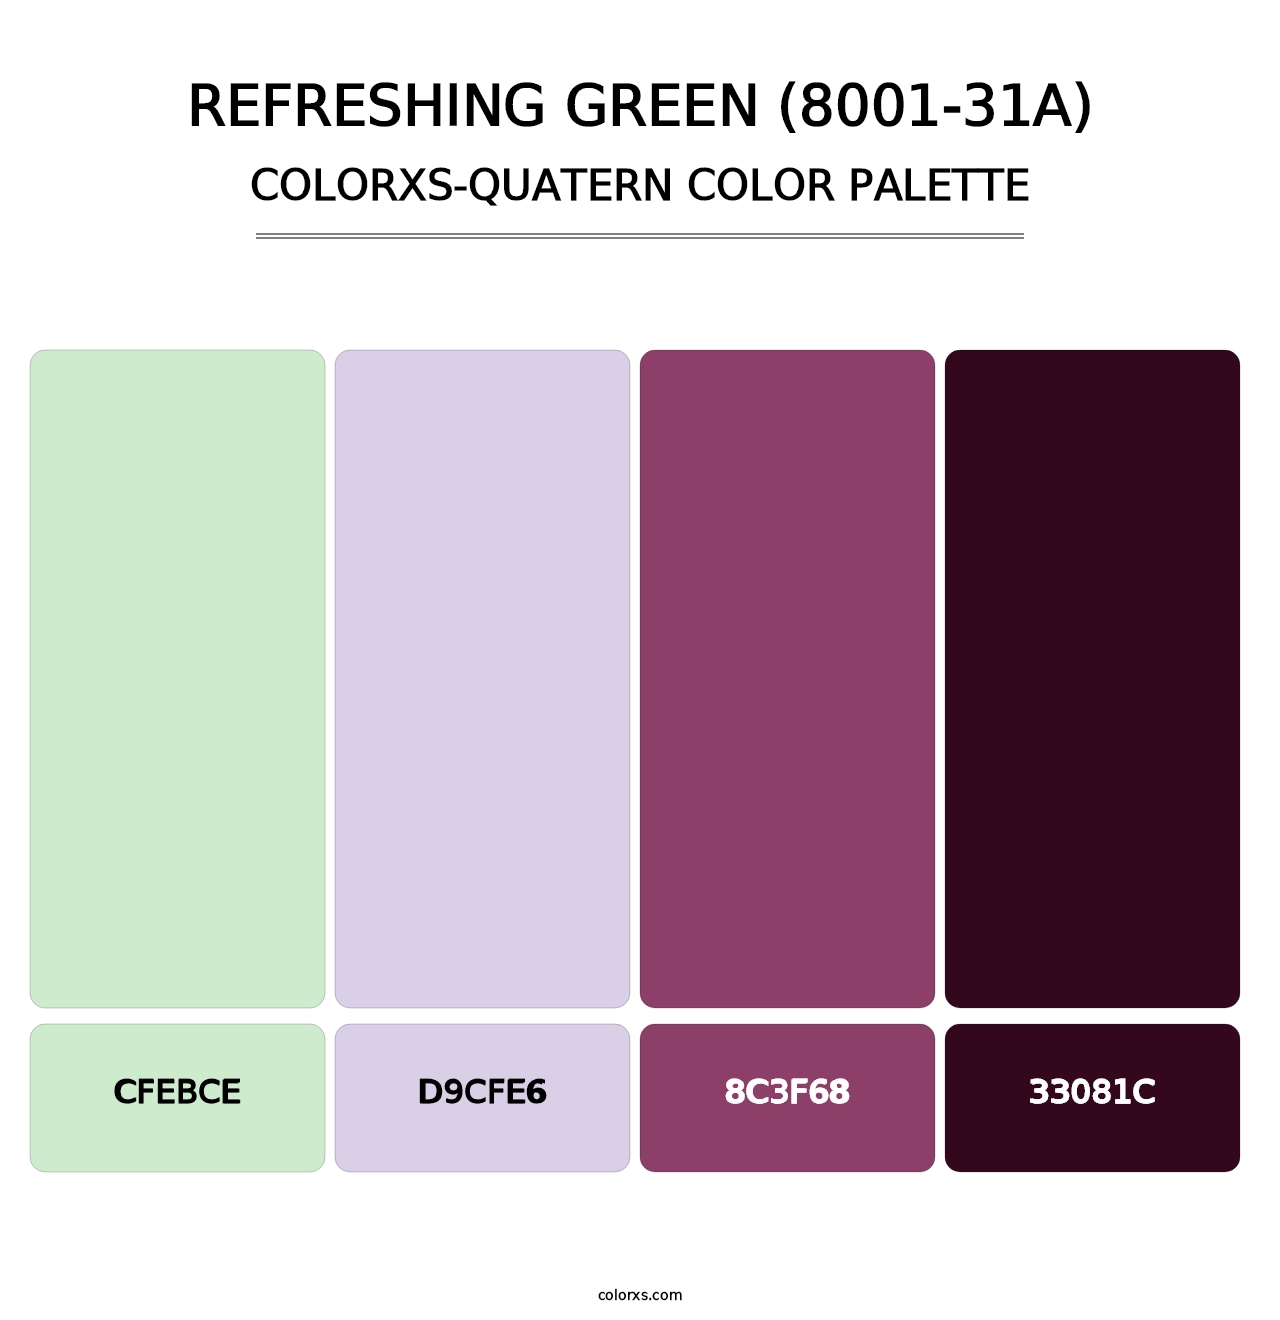 Refreshing Green (8001-31A) - Colorxs Quatern Palette